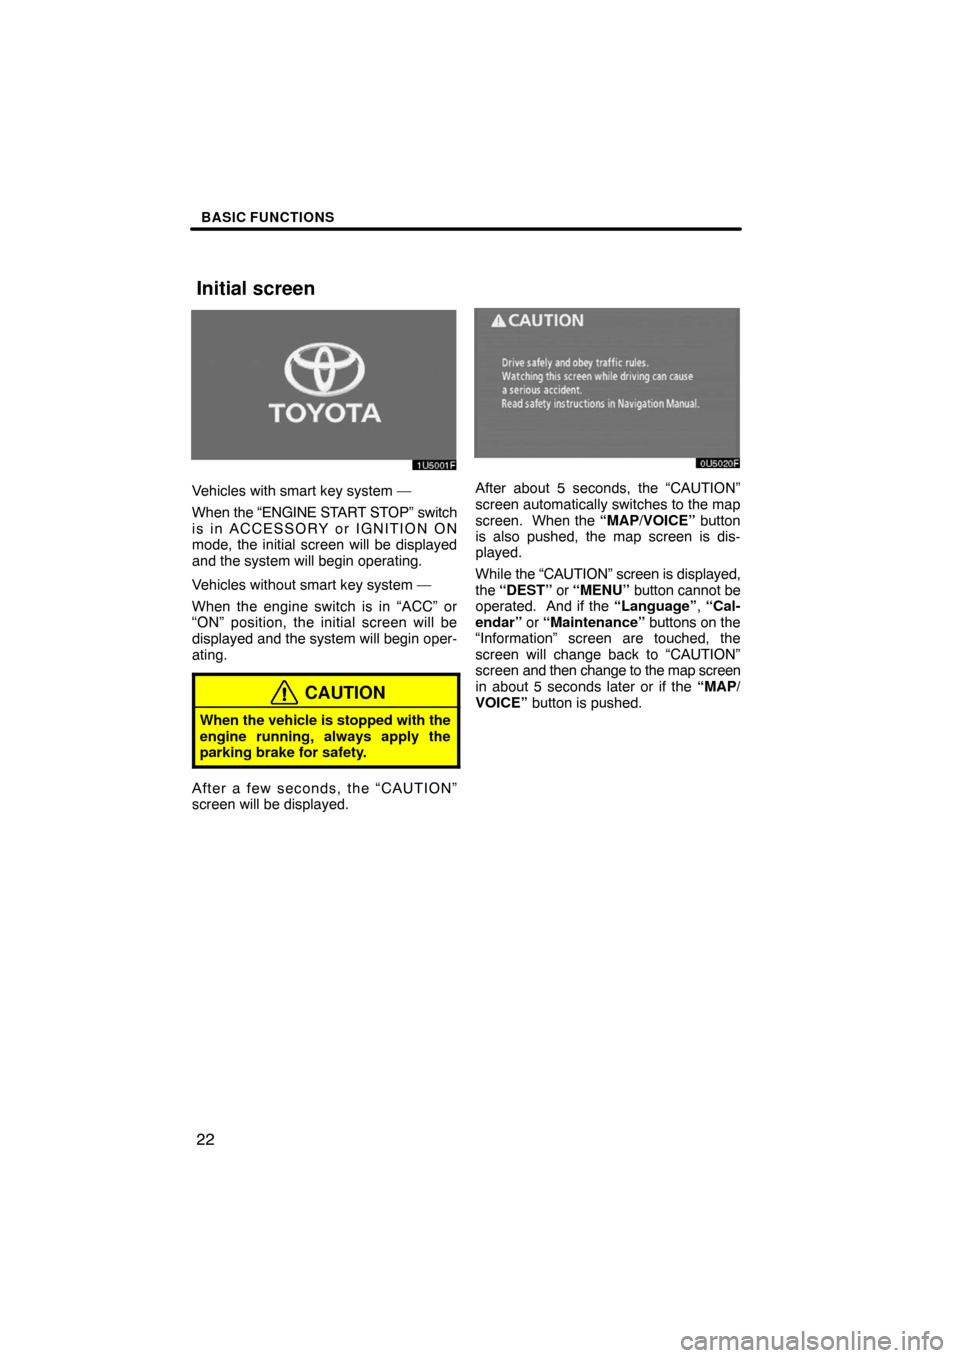 TOYOTA HIGHLANDER 2008 XU40 / 2.G Navigation Manual BASIC FUNCTIONS
22
Vehicles with smart key system —
When the “ENGINE START STOP” switch
is in ACCESSORY or IGNITION ON
mode, the initial screen will be displayed
and the system will begin operat